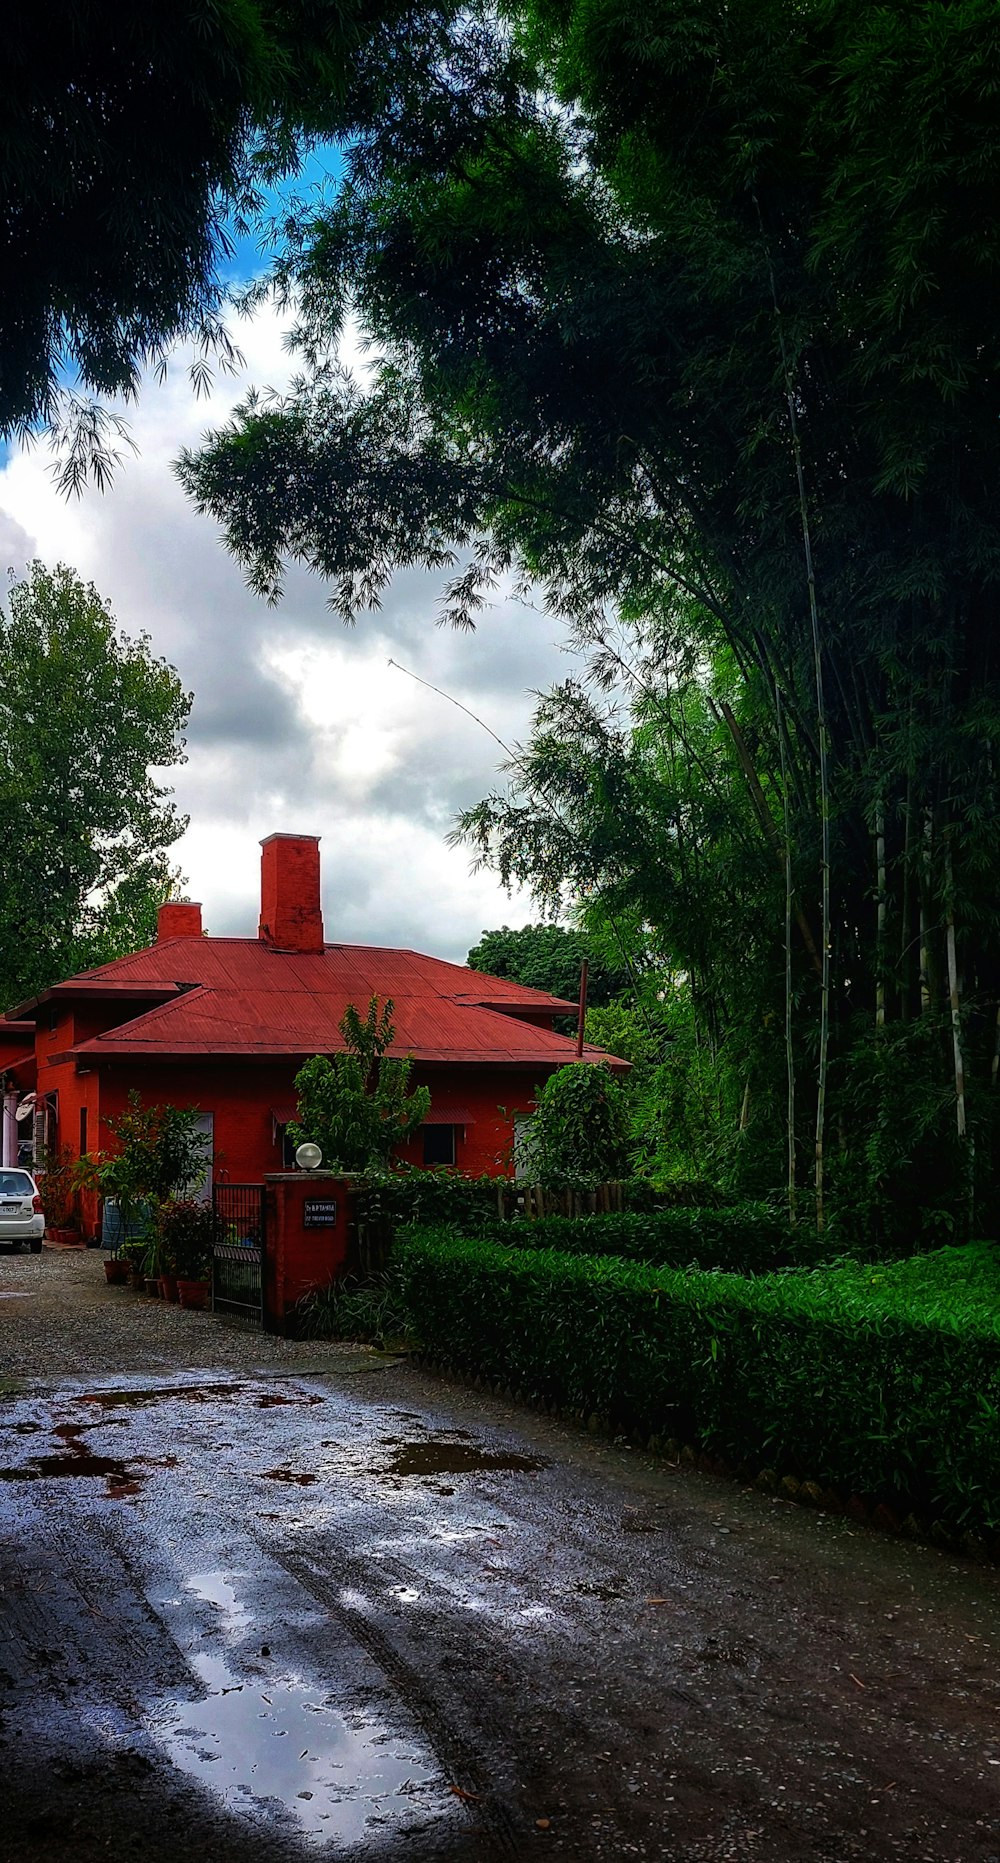 a red house with a red roof surrounded by trees